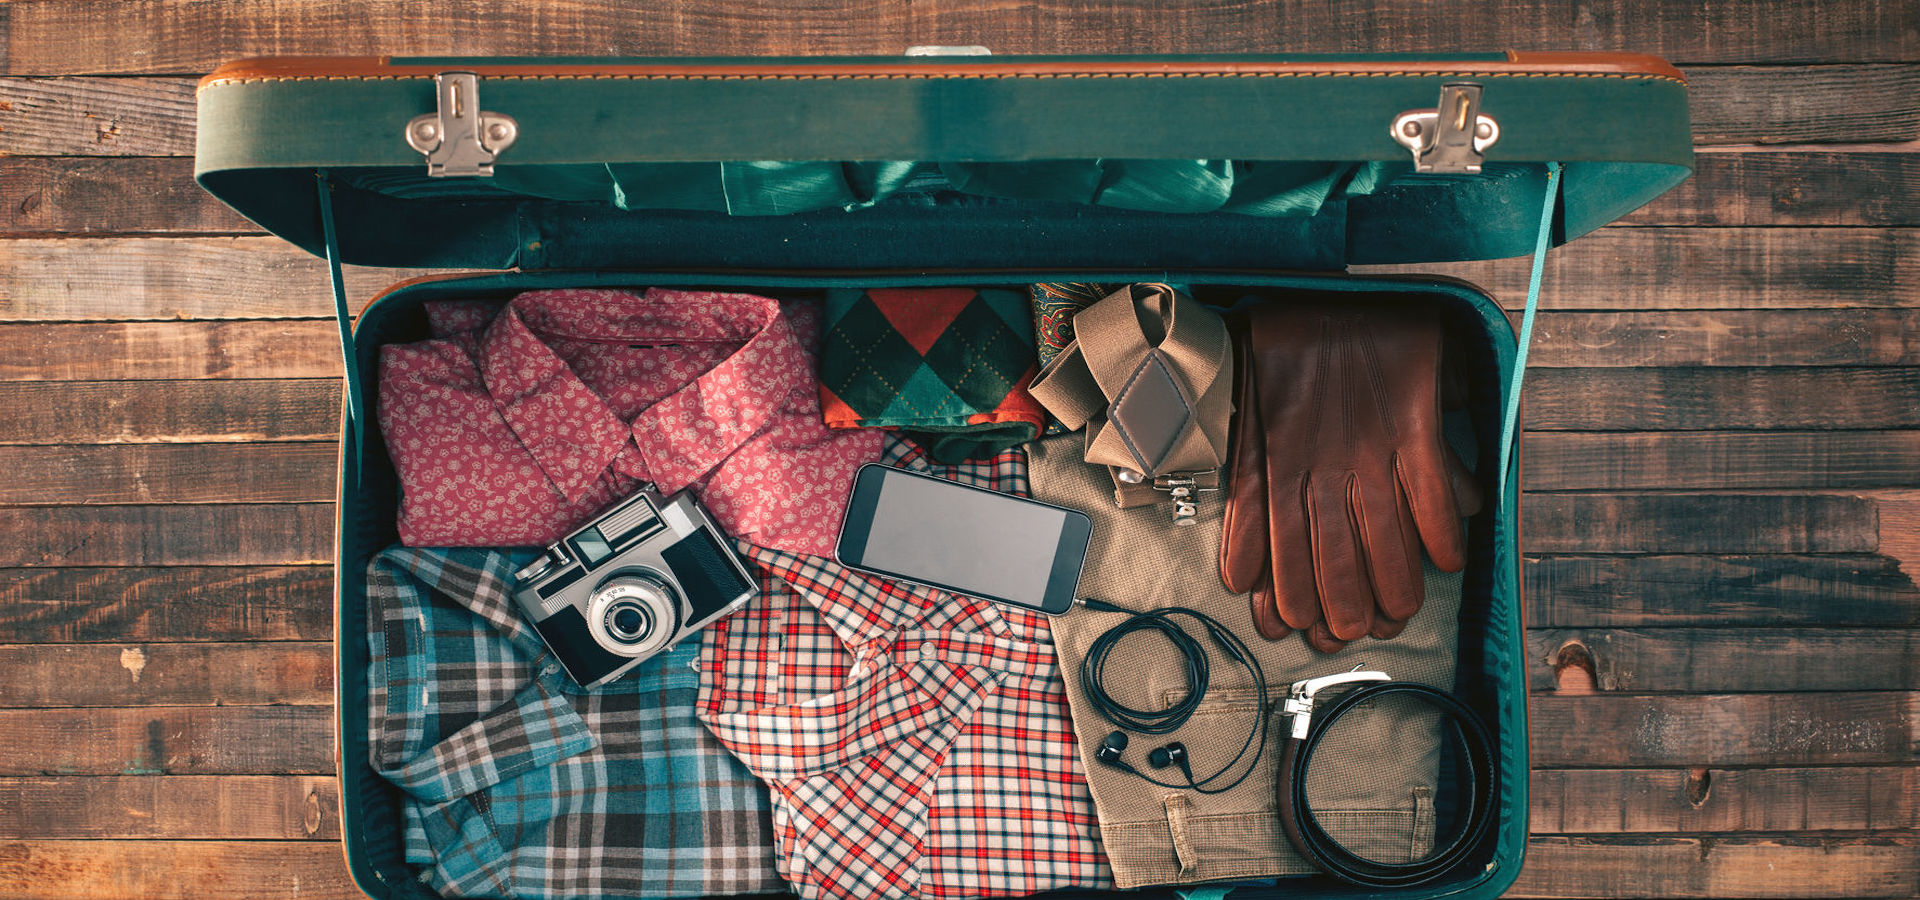 Top view of open suitcase with clothing, camera and mobile phone